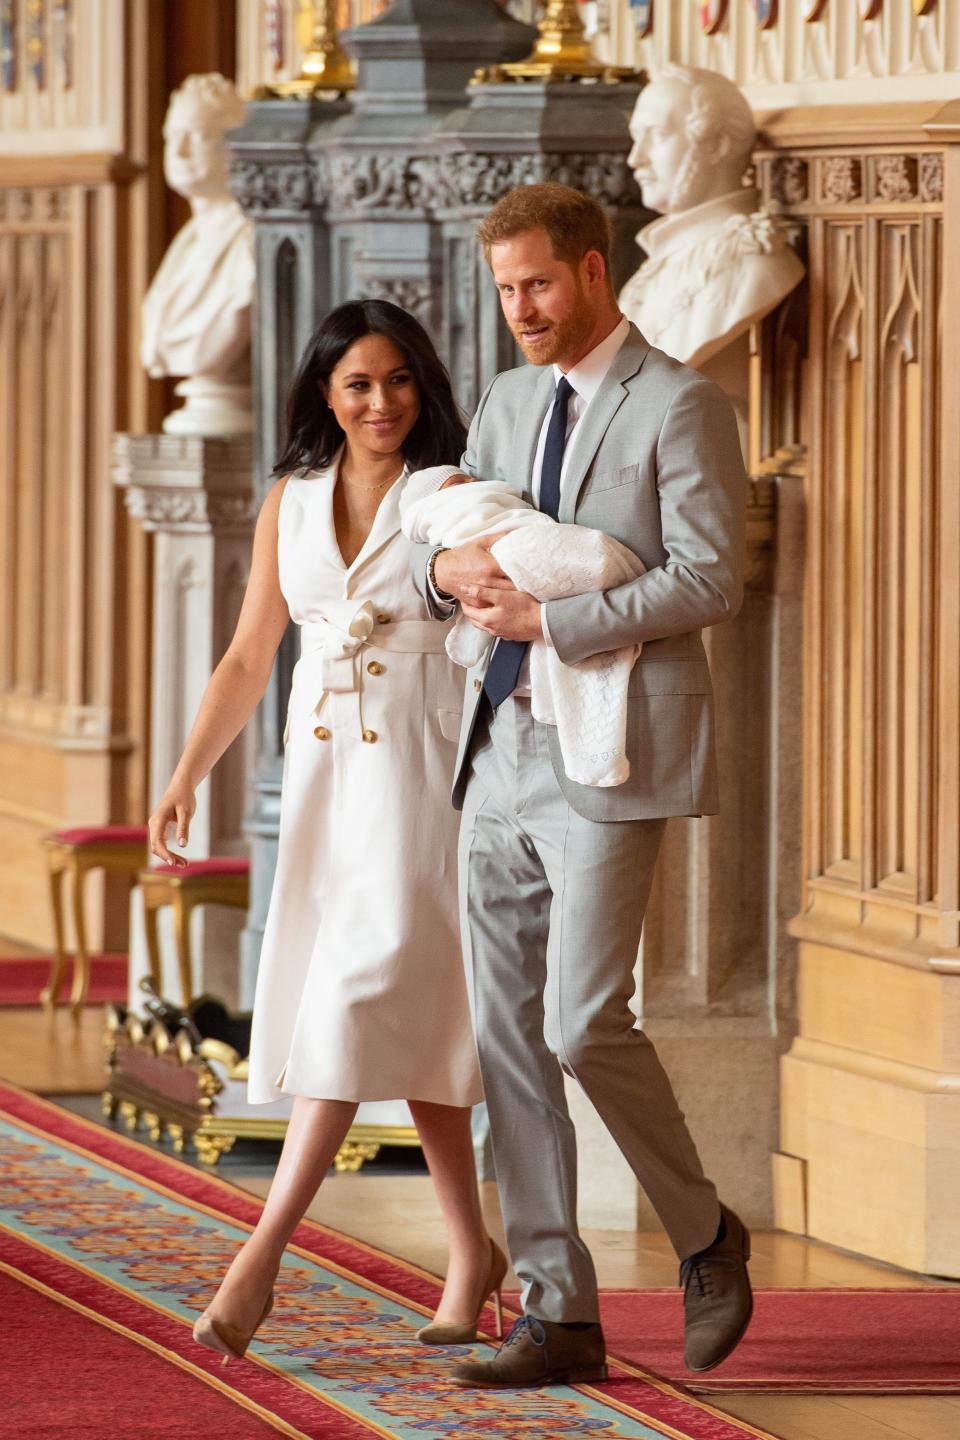 Britain's Prince Harry, Duke of Sussex (R), and his wife Meghan, Duchess of Sussex, pose for a photo with their newborn baby son, Archie Harrison Mountbatten-Windsor, in St George's Hall at Windsor Castle in Windsor, west of London on May 8, 2019. (Photo by Dominic Lipinski / POOL / AFP)        (Photo credit should read DOMINIC LIPINSKI/AFP via Getty Images)